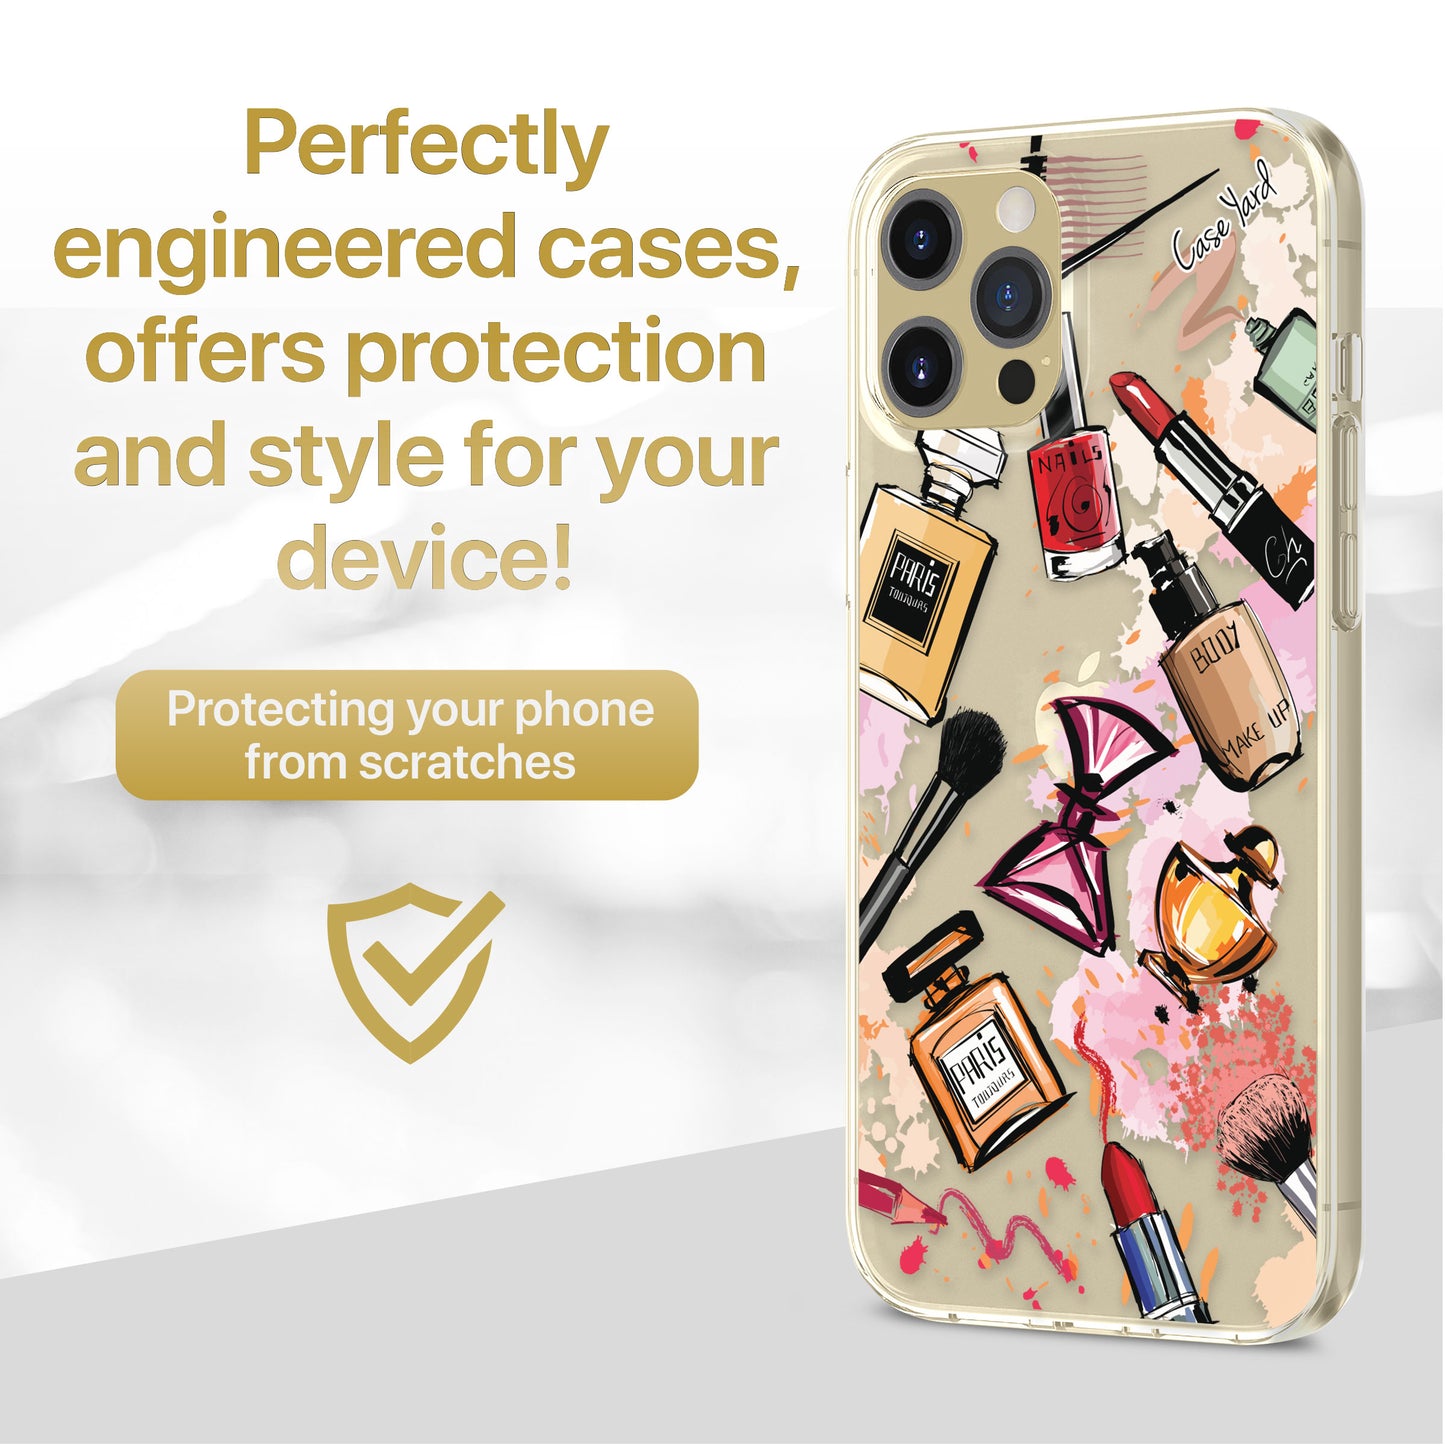 TPU Clear case with (Make Up Case) Design for iPhone & Samsung Phones